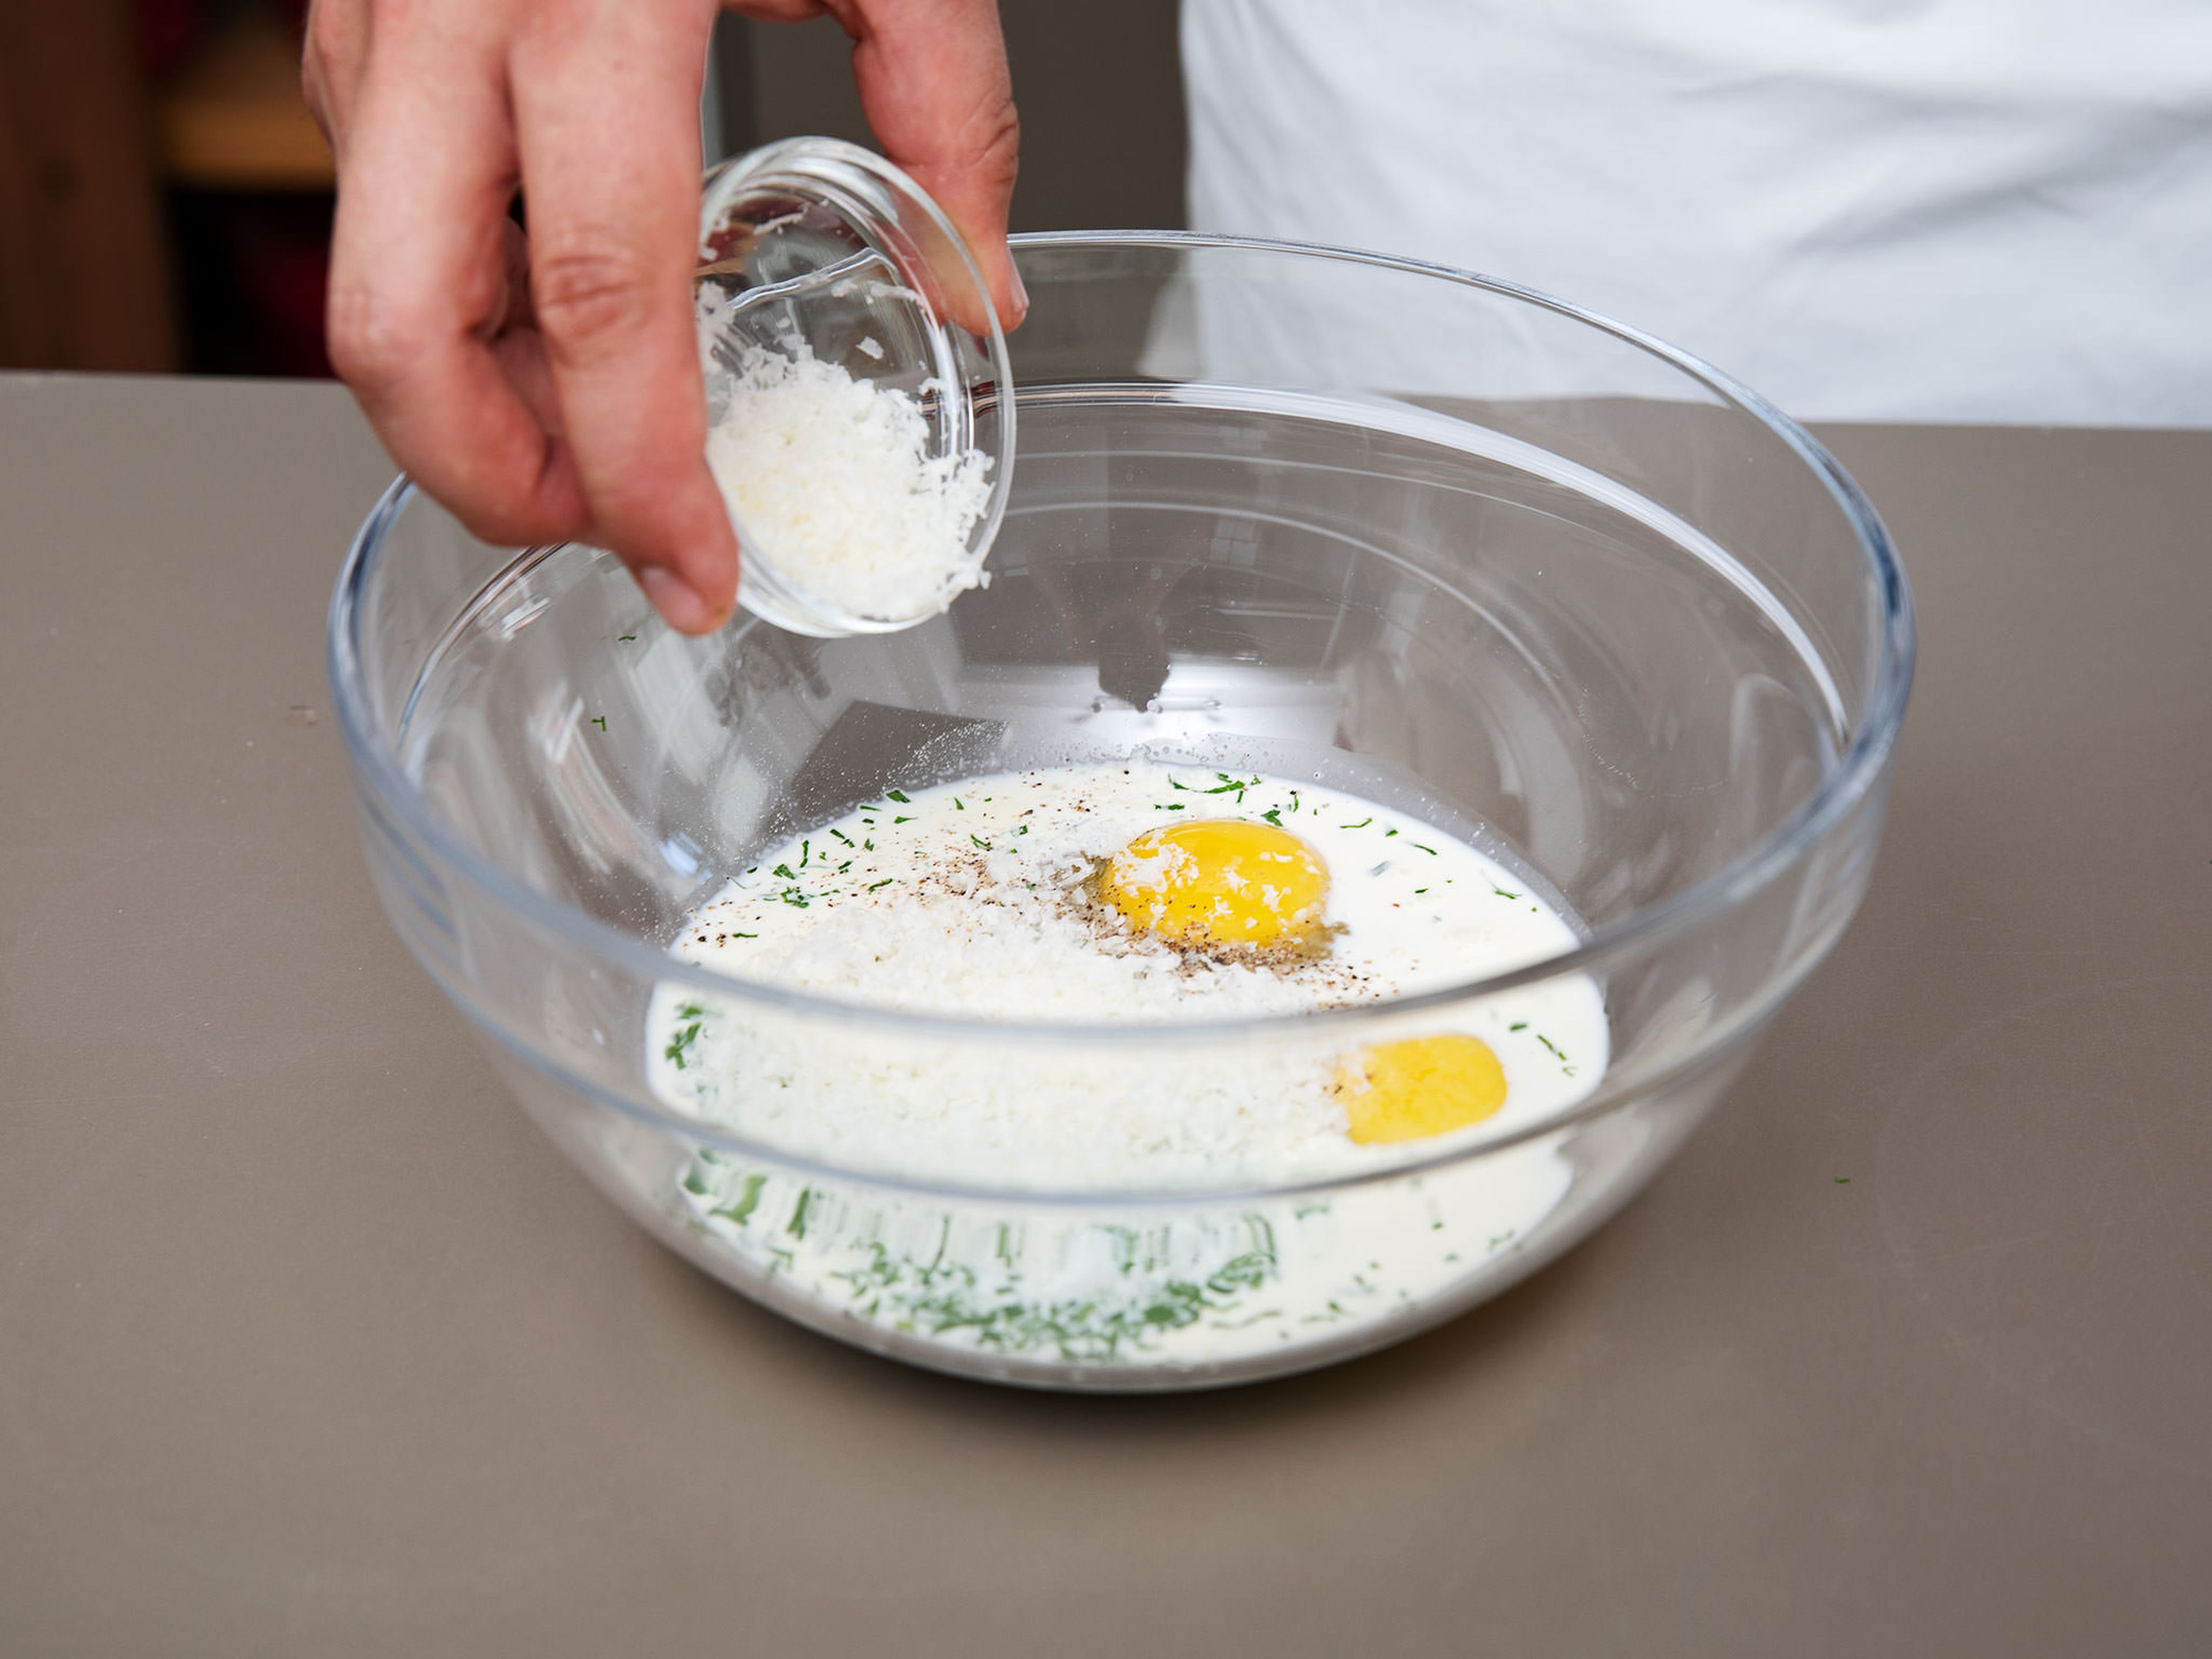 Finely chop parsley. Add chopped parsley, eggs, cream, milk, Parmesan, and garlic paste to a bowl and whisk until combined. Dunk bread slices into the egg-mixture, coating both sides.